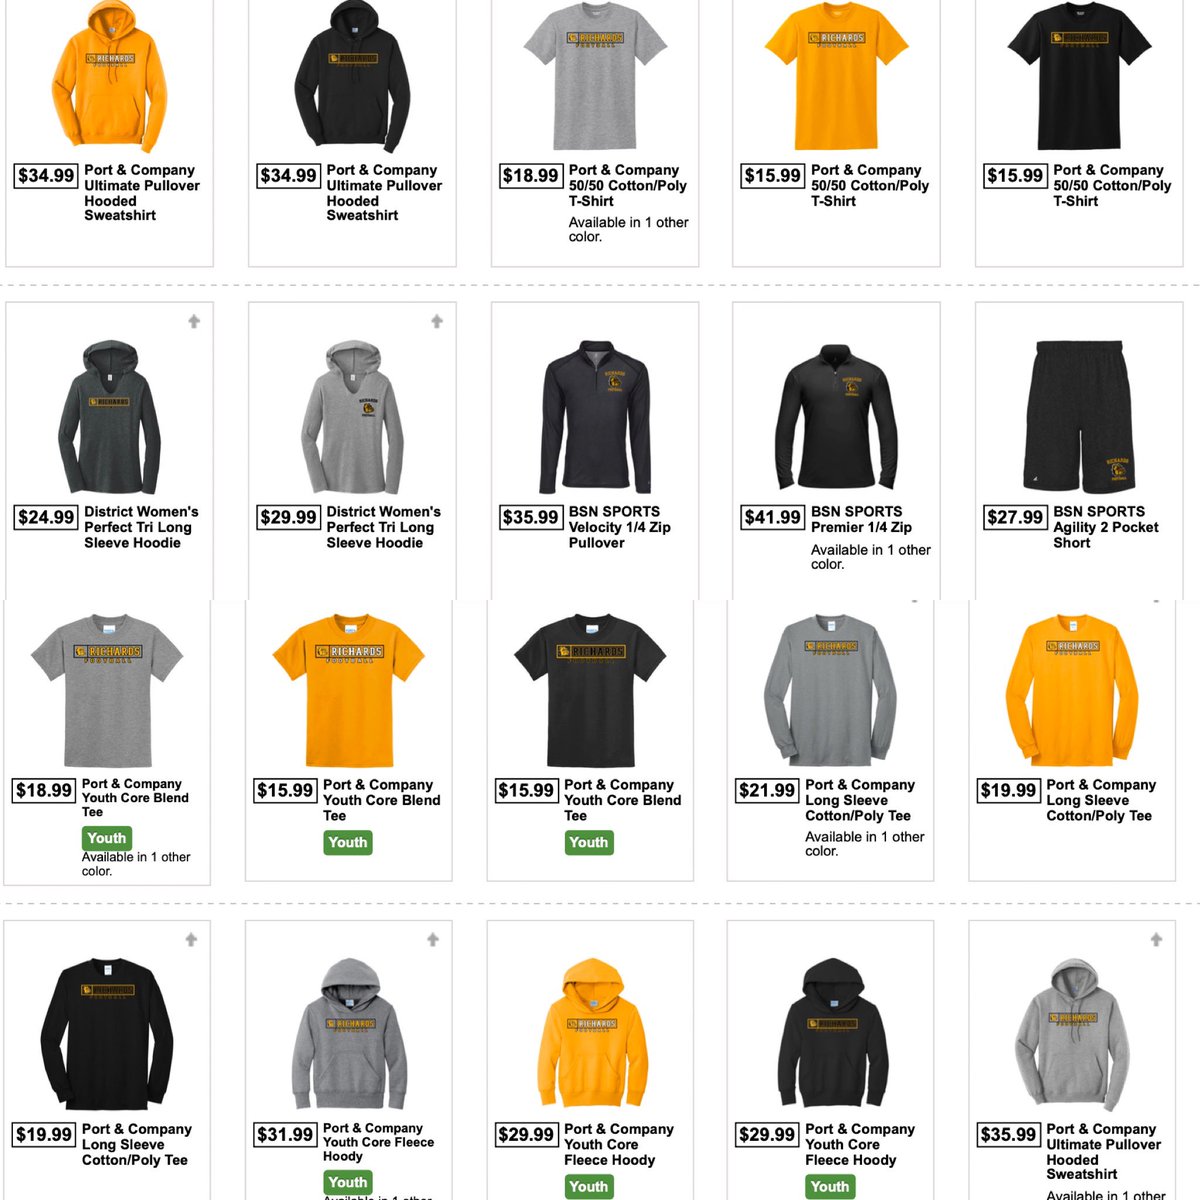 THE TEAM STORE CLOSES TONIGHT! Richards Football players, staff, family & friends; Tonight is the last day that you can order your new gear. Click on the link below for more info. My Team Shop bsnteamsports.com/shop/QankPRVtsq